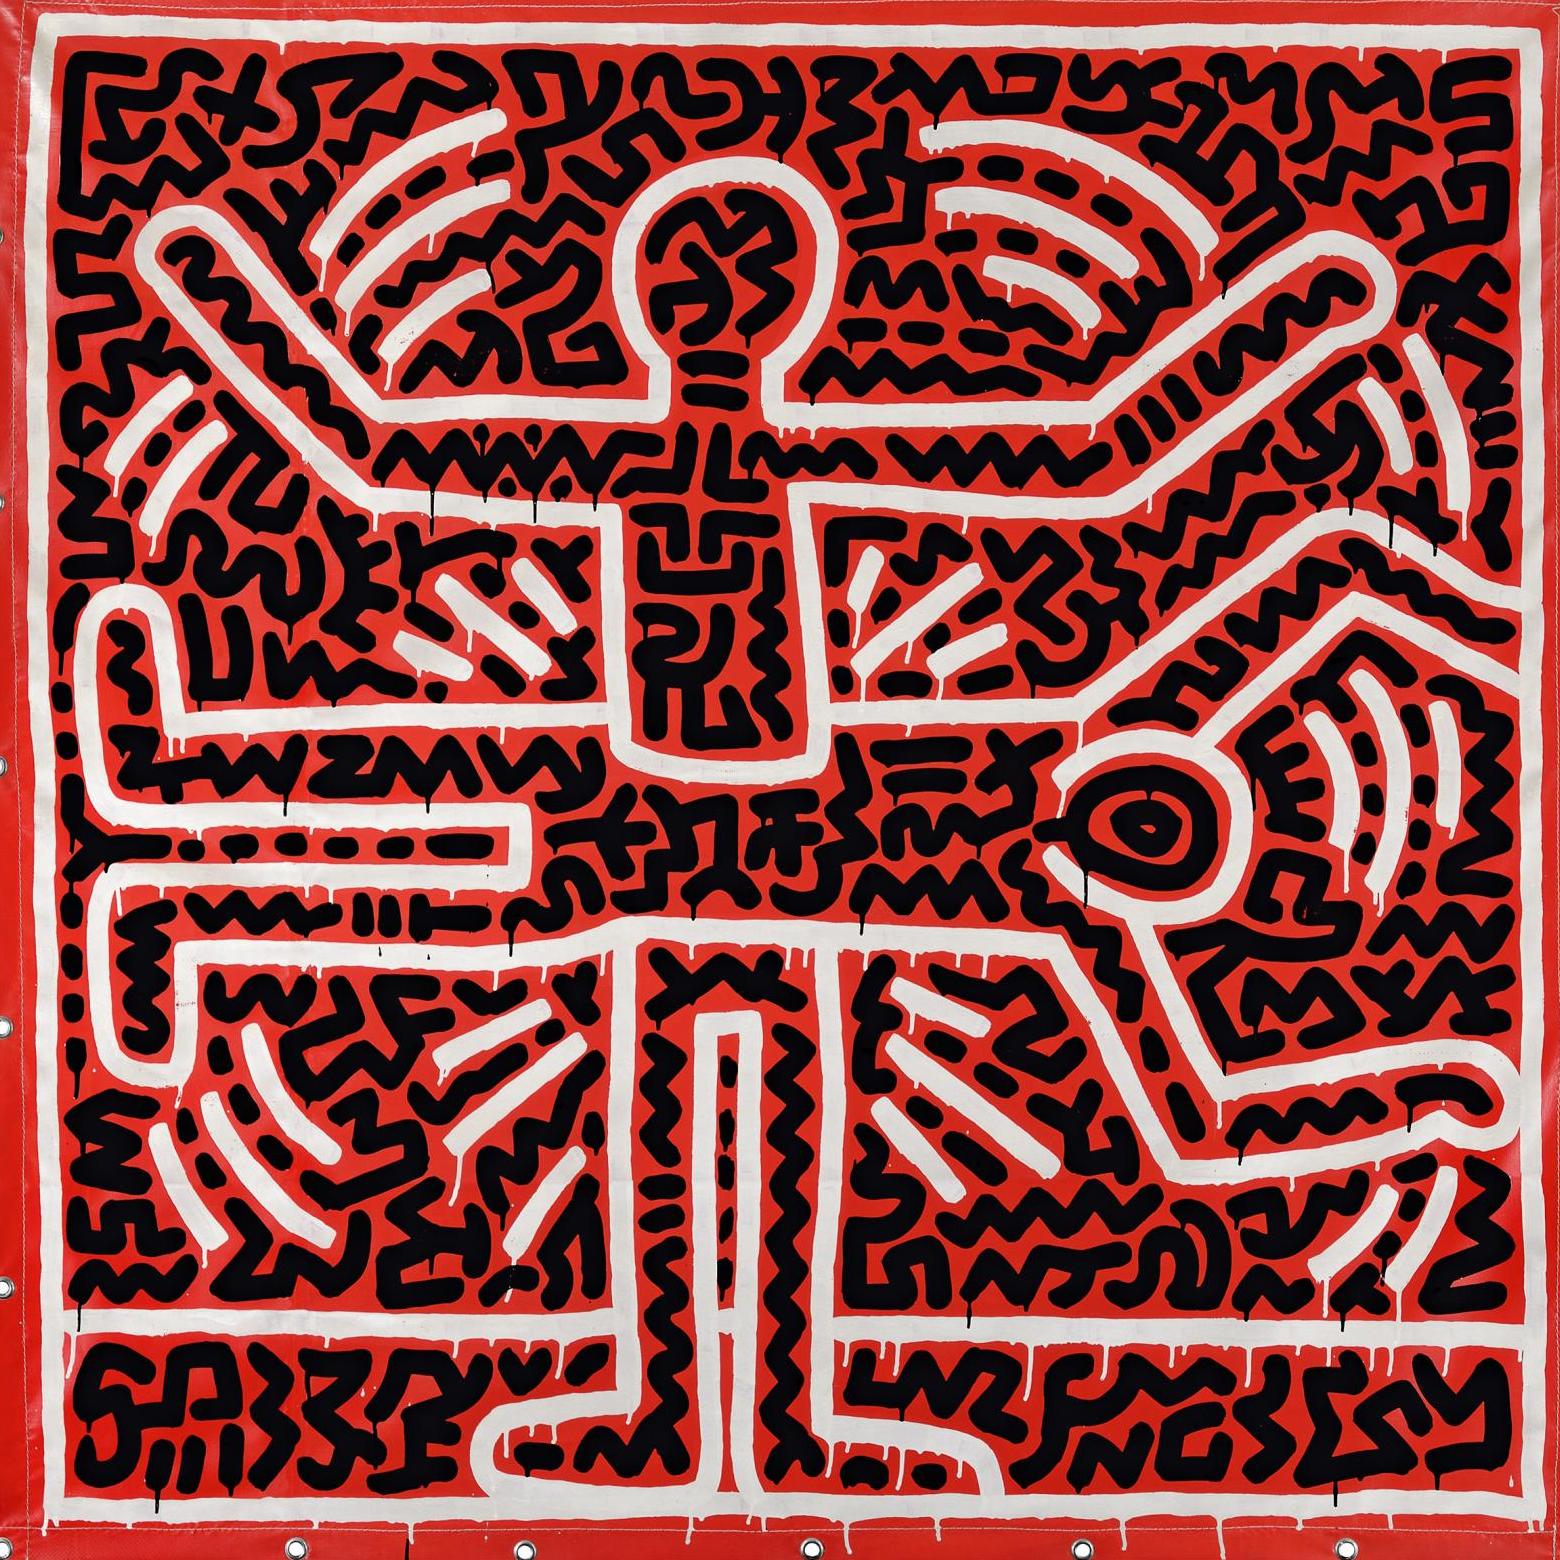 Keith Haring à Essen - Expositions